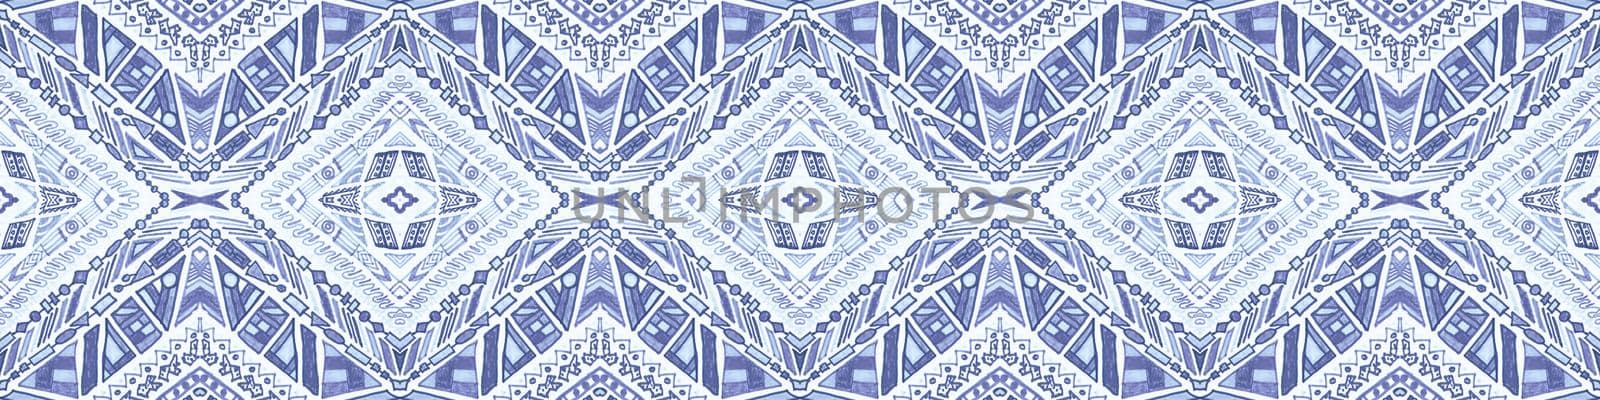 Geometric tribal ribbon. Seamless ethnic pattern. Art aztec background. Mexico native illustration. Hand drawn tribal ribbon. Abstract maya design for fabric. Grunge african texture.